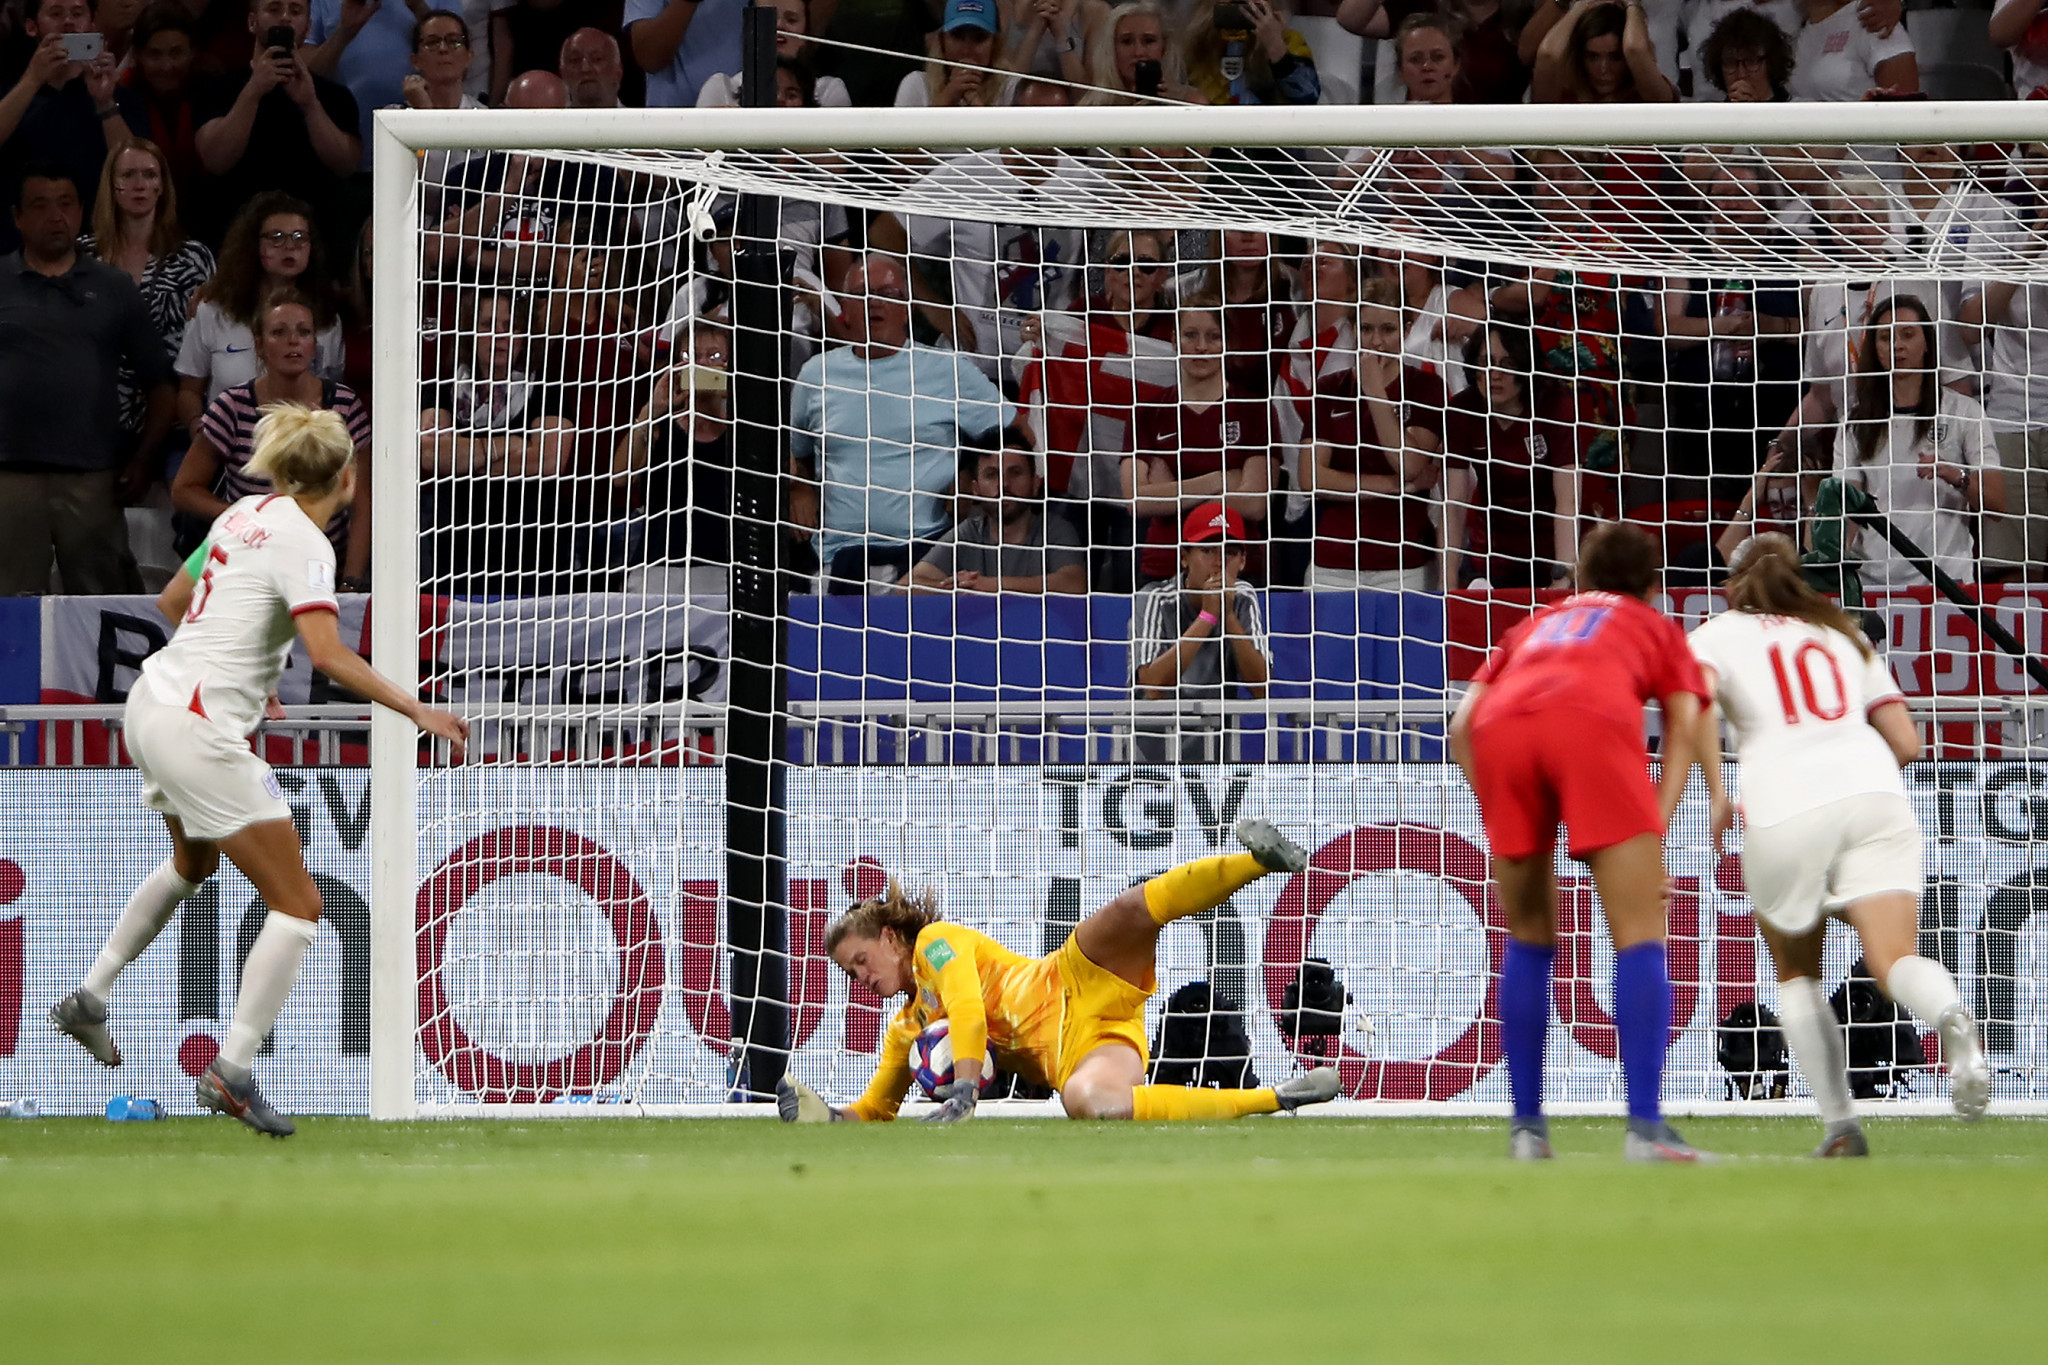 Captain Steph Houghton missed the resulting spot-kick as England's hopes were dashed ©Getty Images